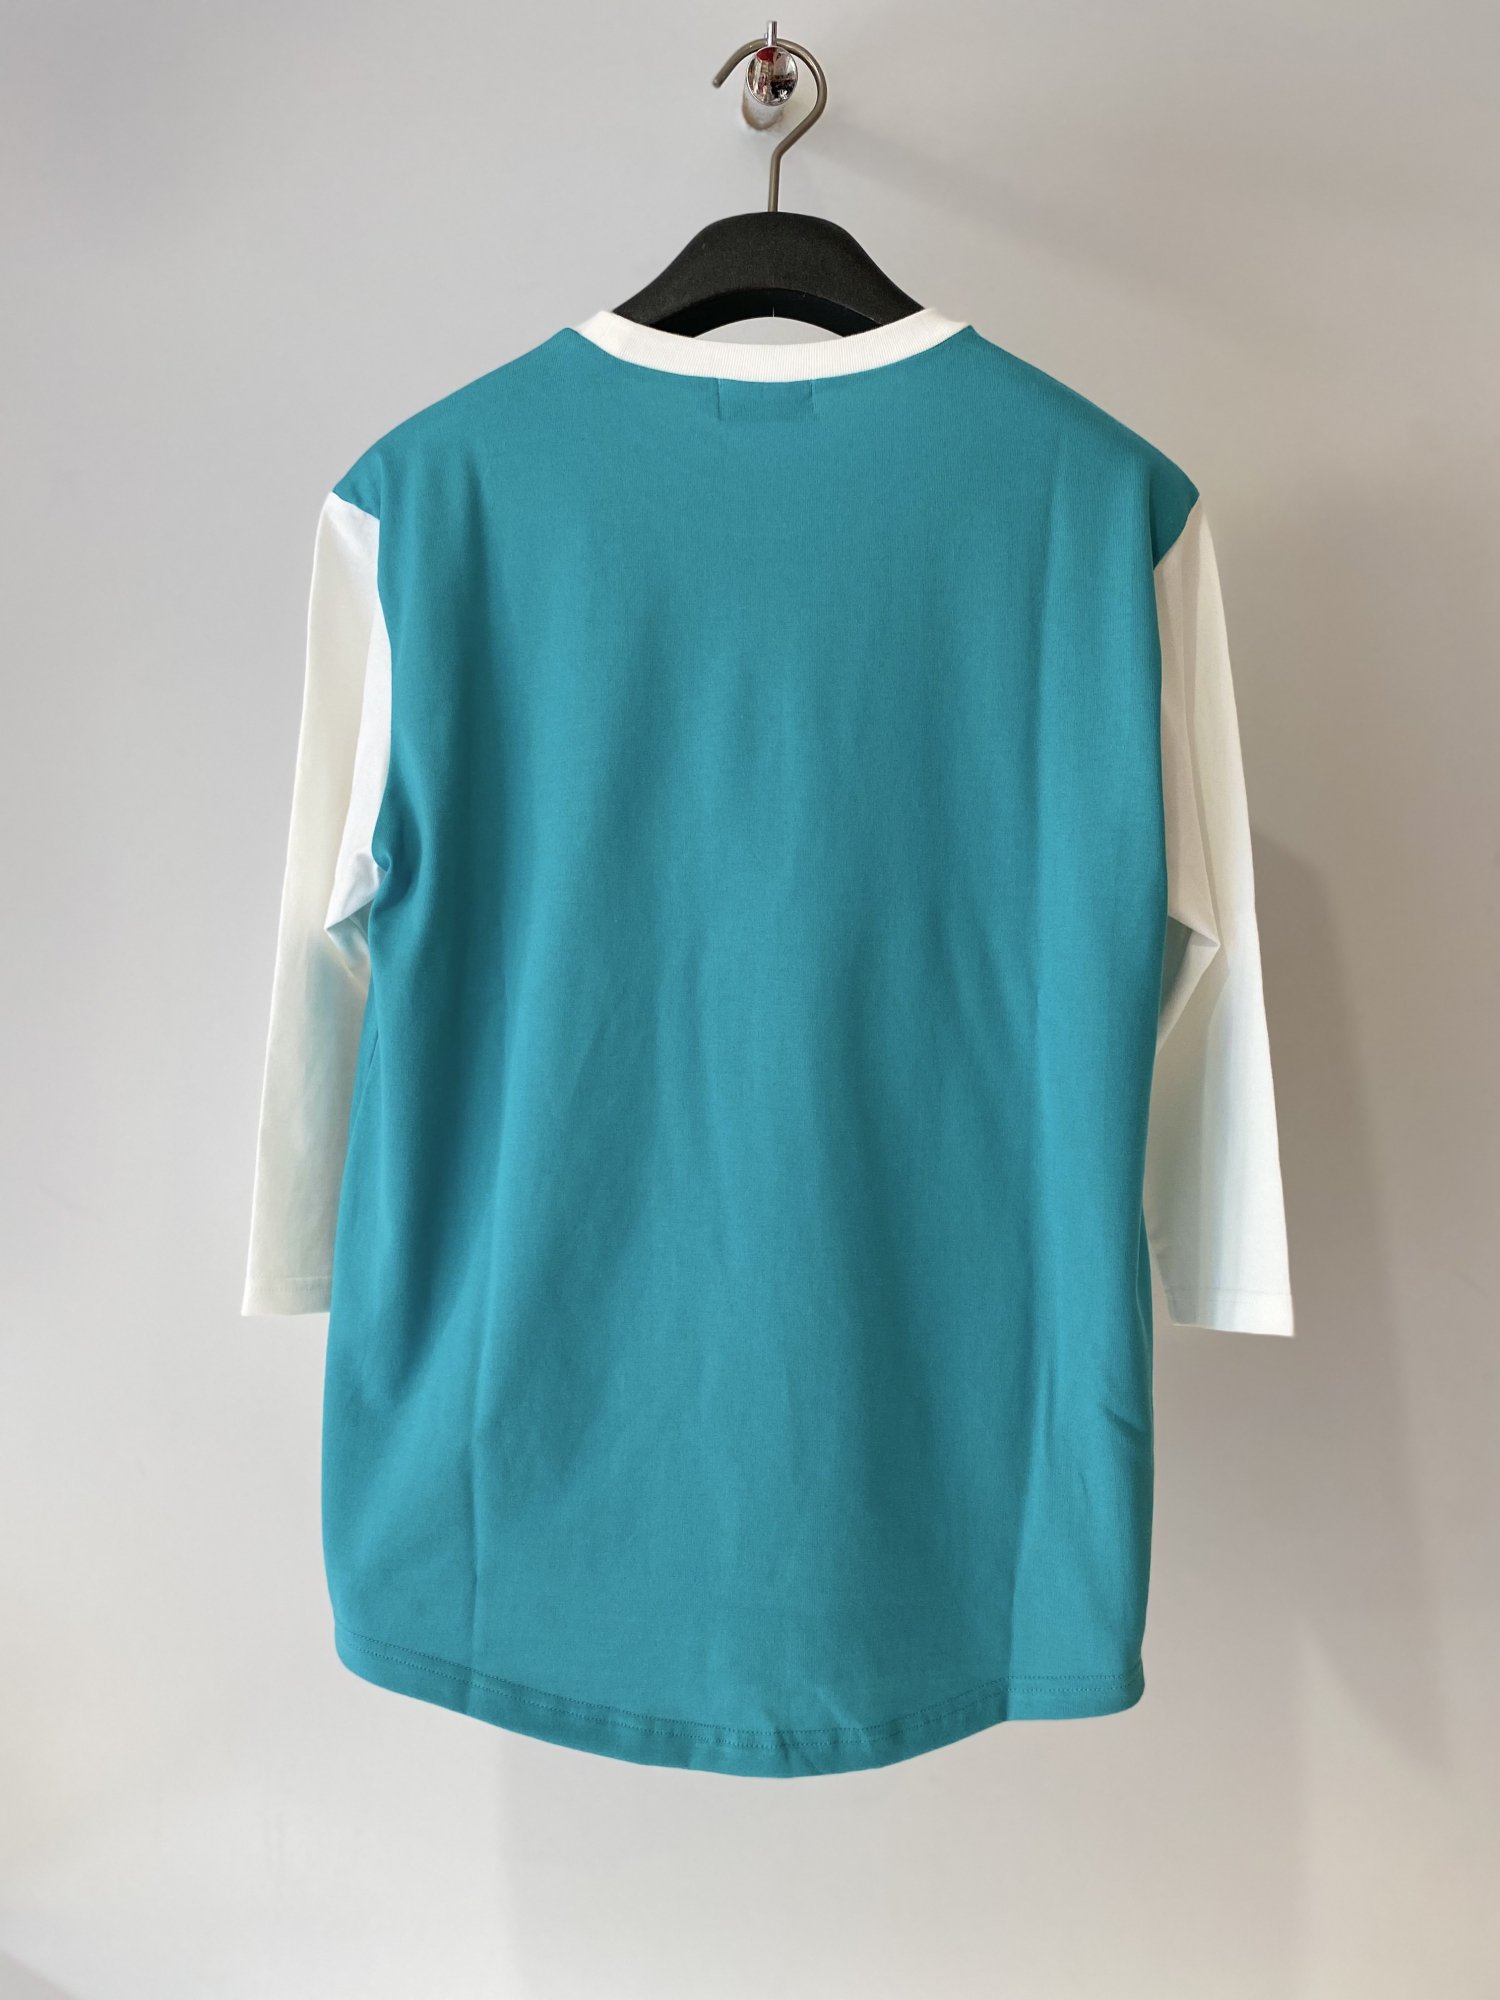 LITTLEBIG<br />3/4 Sleeve CS / Green<img class='new_mark_img2' src='https://img.shop-pro.jp/img/new/icons14.gif' style='border:none;display:inline;margin:0px;padding:0px;width:auto;' />